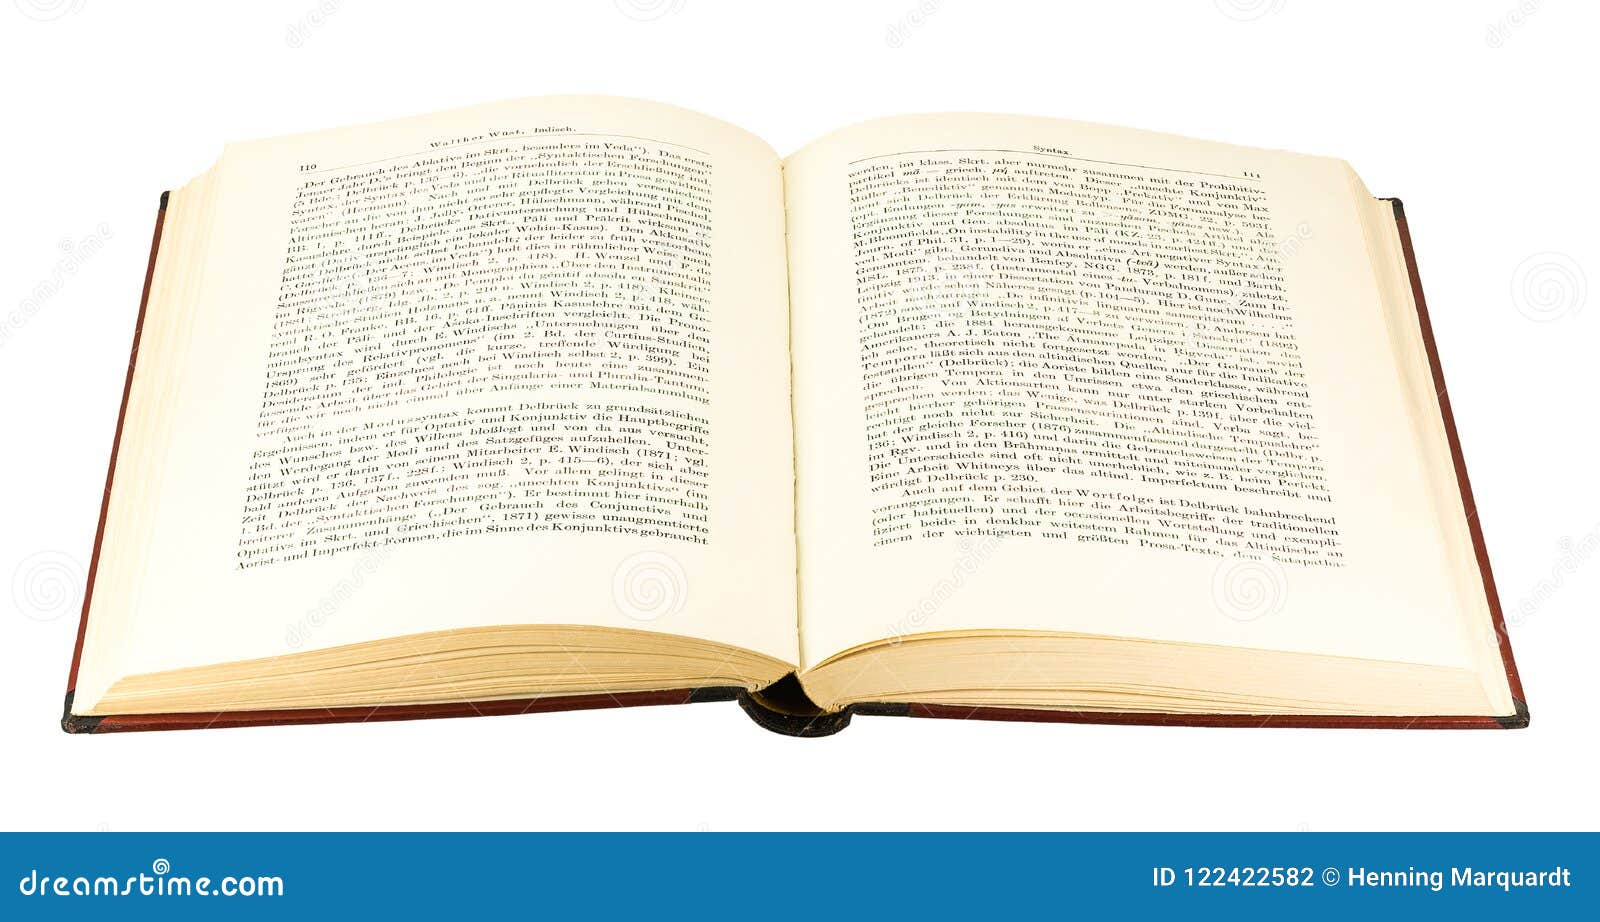 Pages on Top Each Other of Open Book Stock Photo - Image of pitched: 122422582